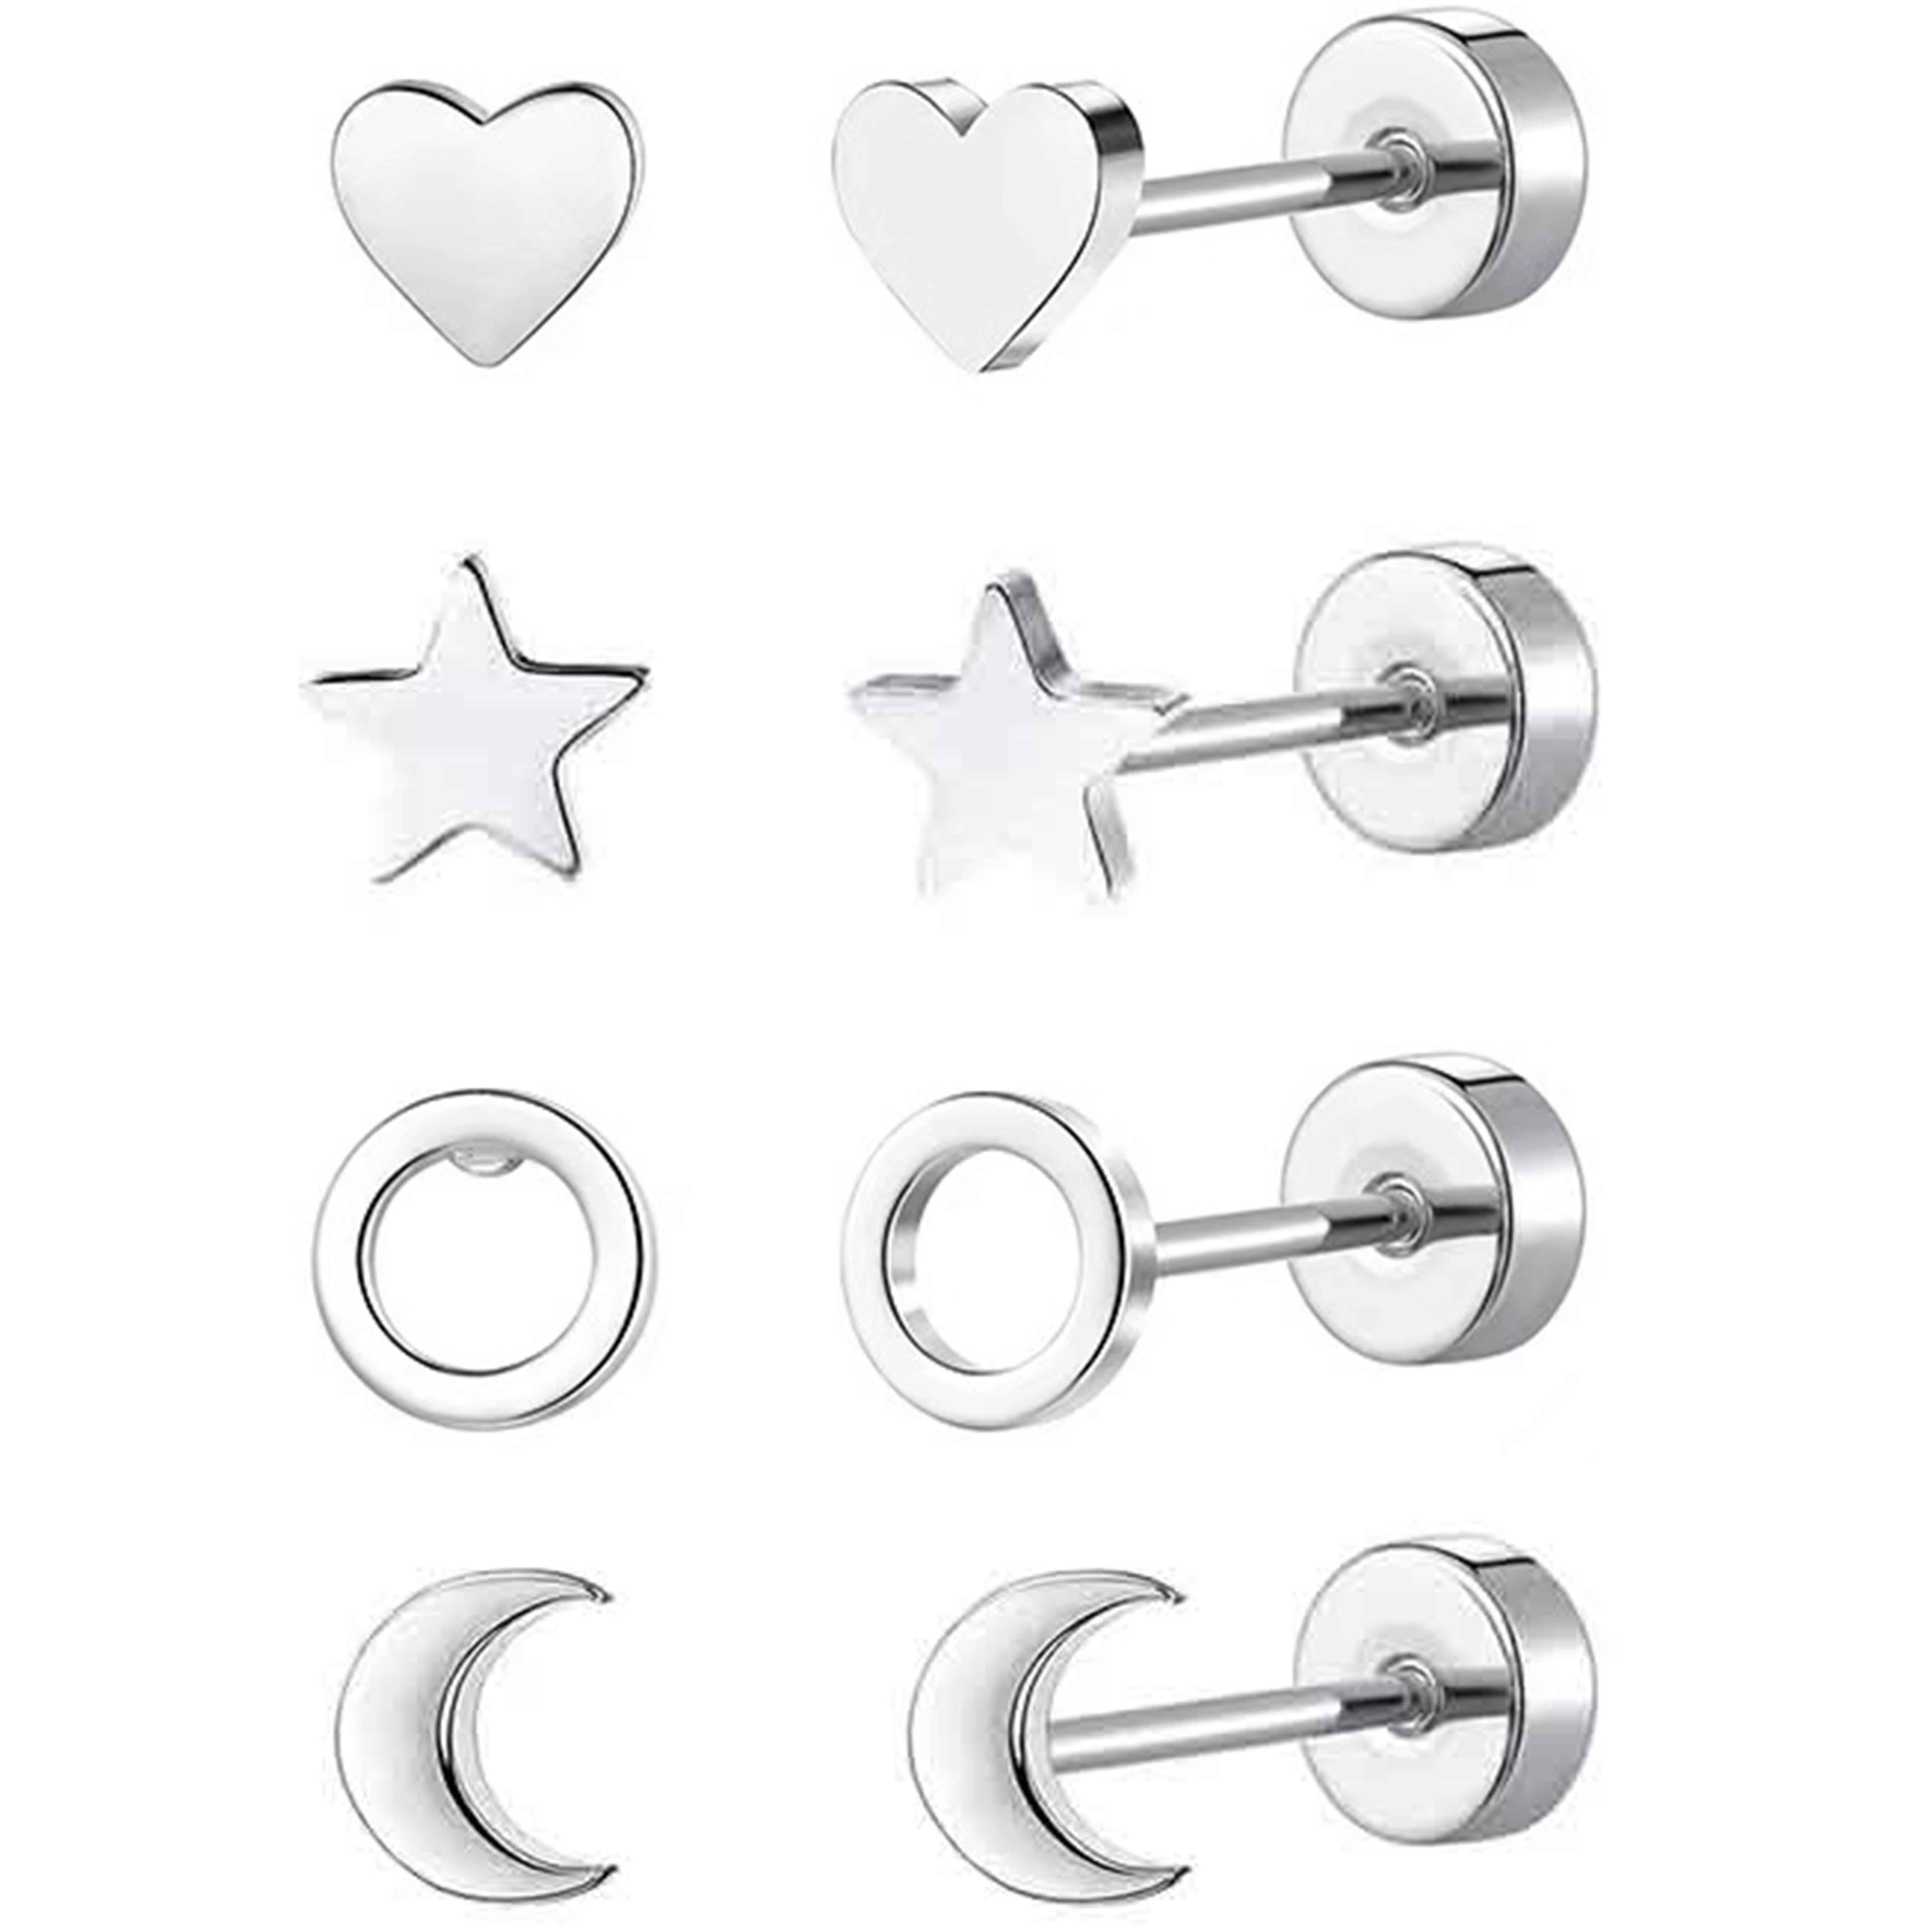 

4 Pairs Set Of Titanium Steel Small Stud Earring Simple Leisure Style Lightweight Female Ear Ornaments For Women Daily Wear